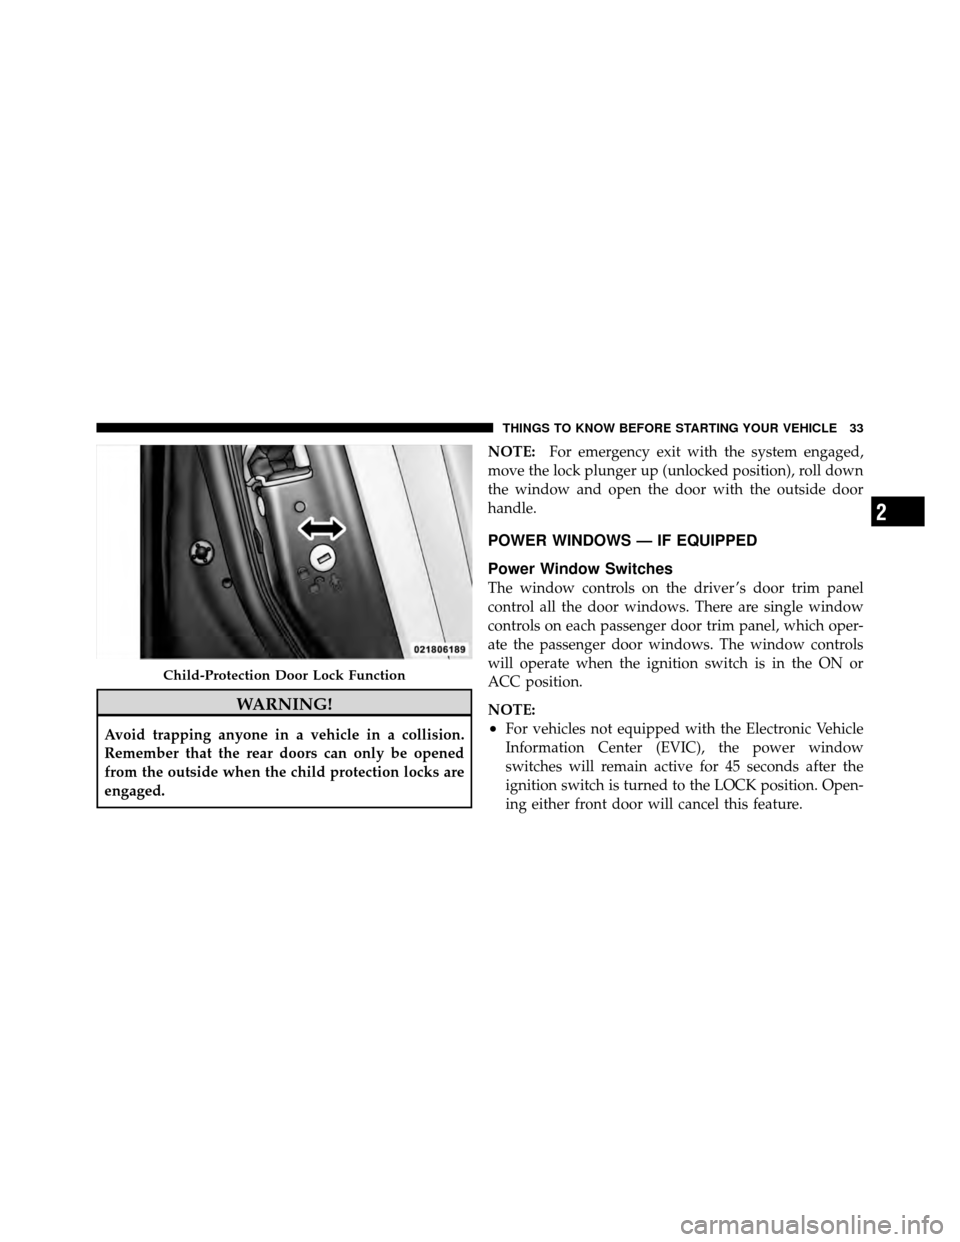 DODGE CALIBER 2010 1.G Owners Guide WARNING!
Avoid trapping anyone in a vehicle in a collision.
Remember that the rear doors can only be opened
from the outside when the child protection locks are
engaged.NOTE:
For emergency exit with t